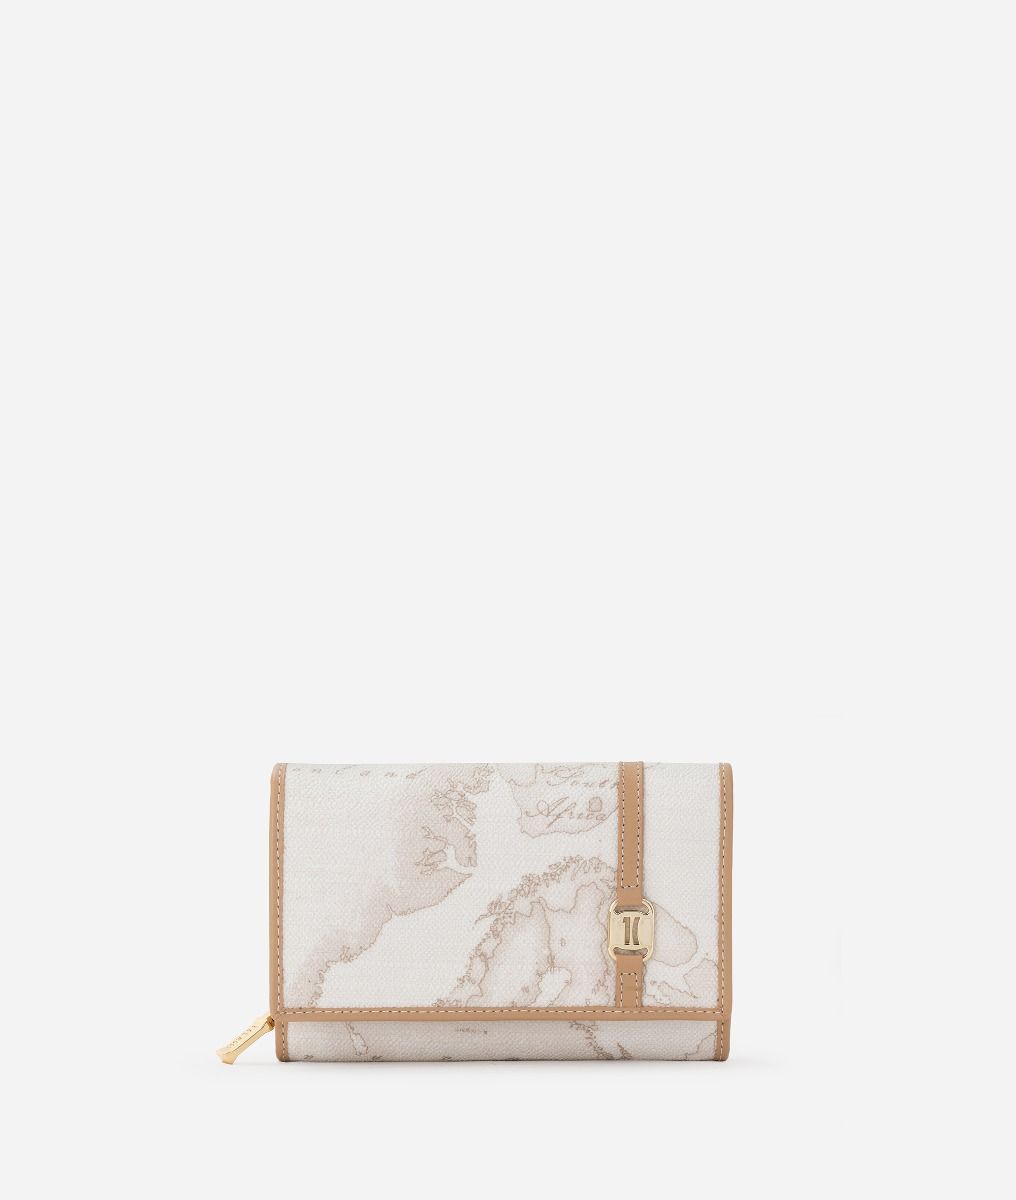 Geo White wallet with 1C detail ,front